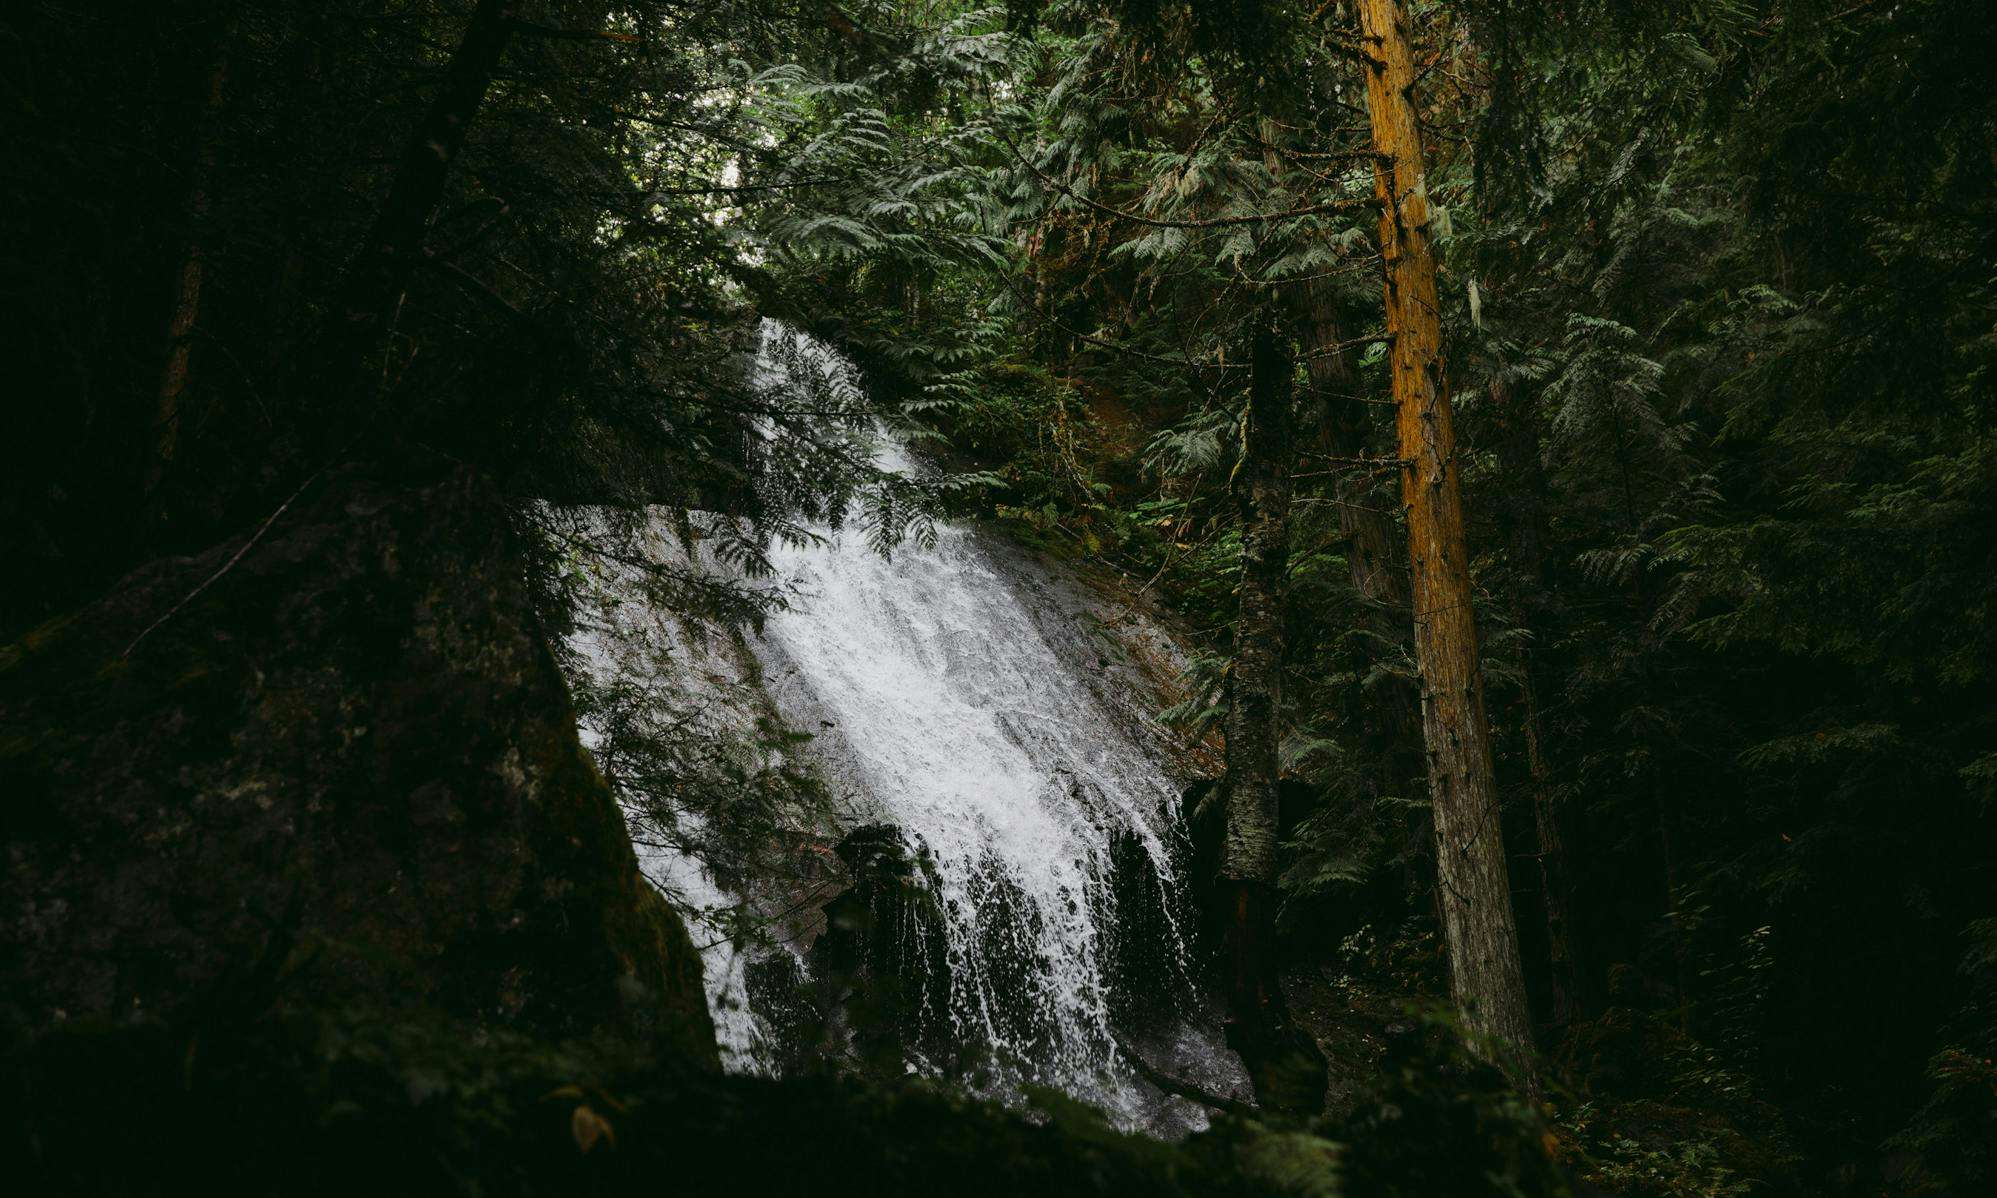 Waterfall surrounded by ferns and trees